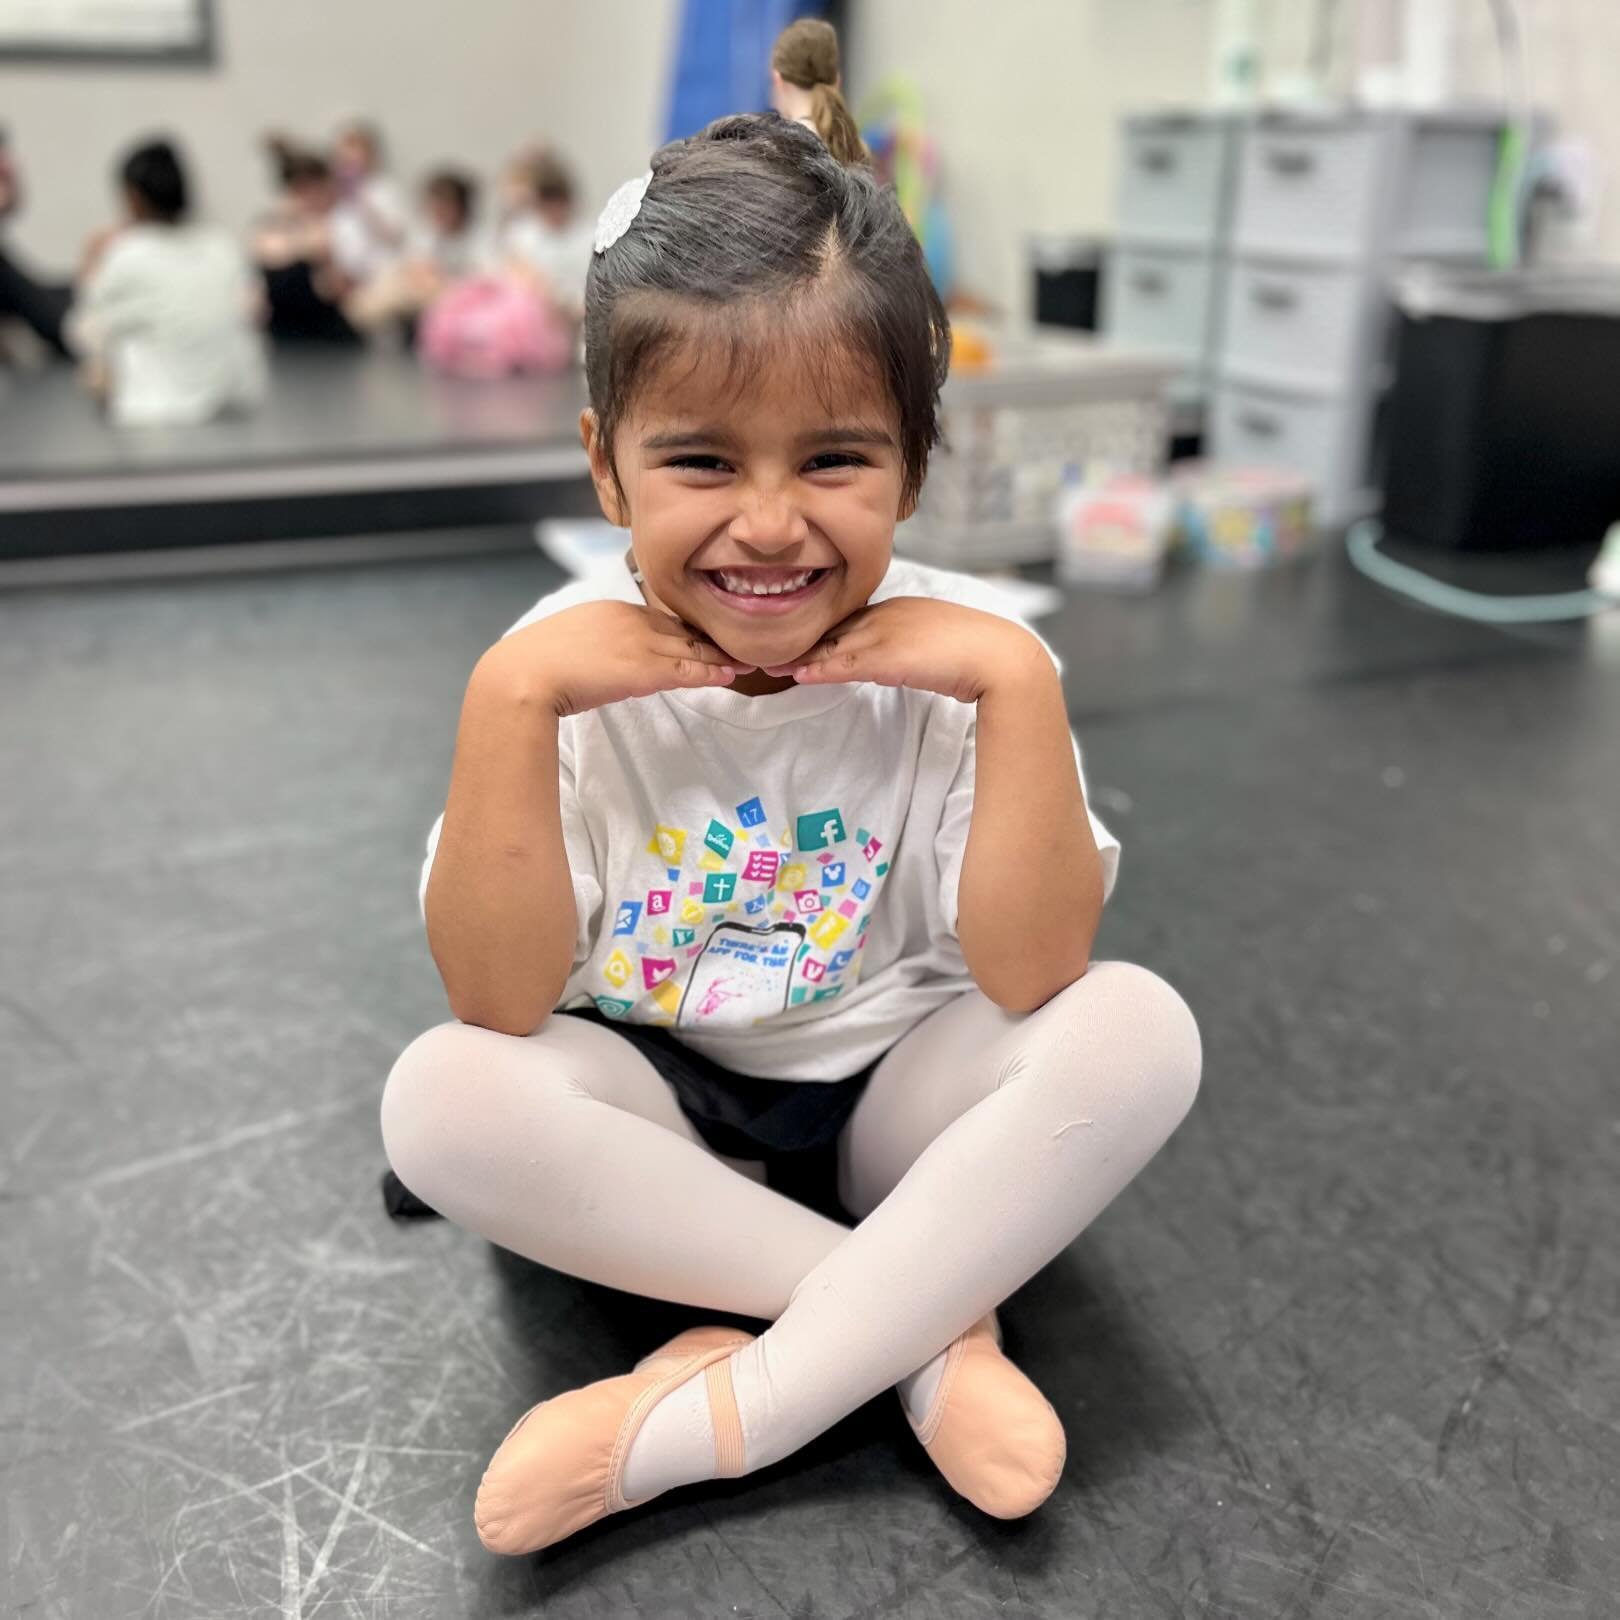 It&rsquo;s Spirit Week at SODC! Don&rsquo;t forget to wear your recital shirt to class this week. Parents are invited into the last 10 minutes of class to watch a performance of their dancers recital dance! See you in class!